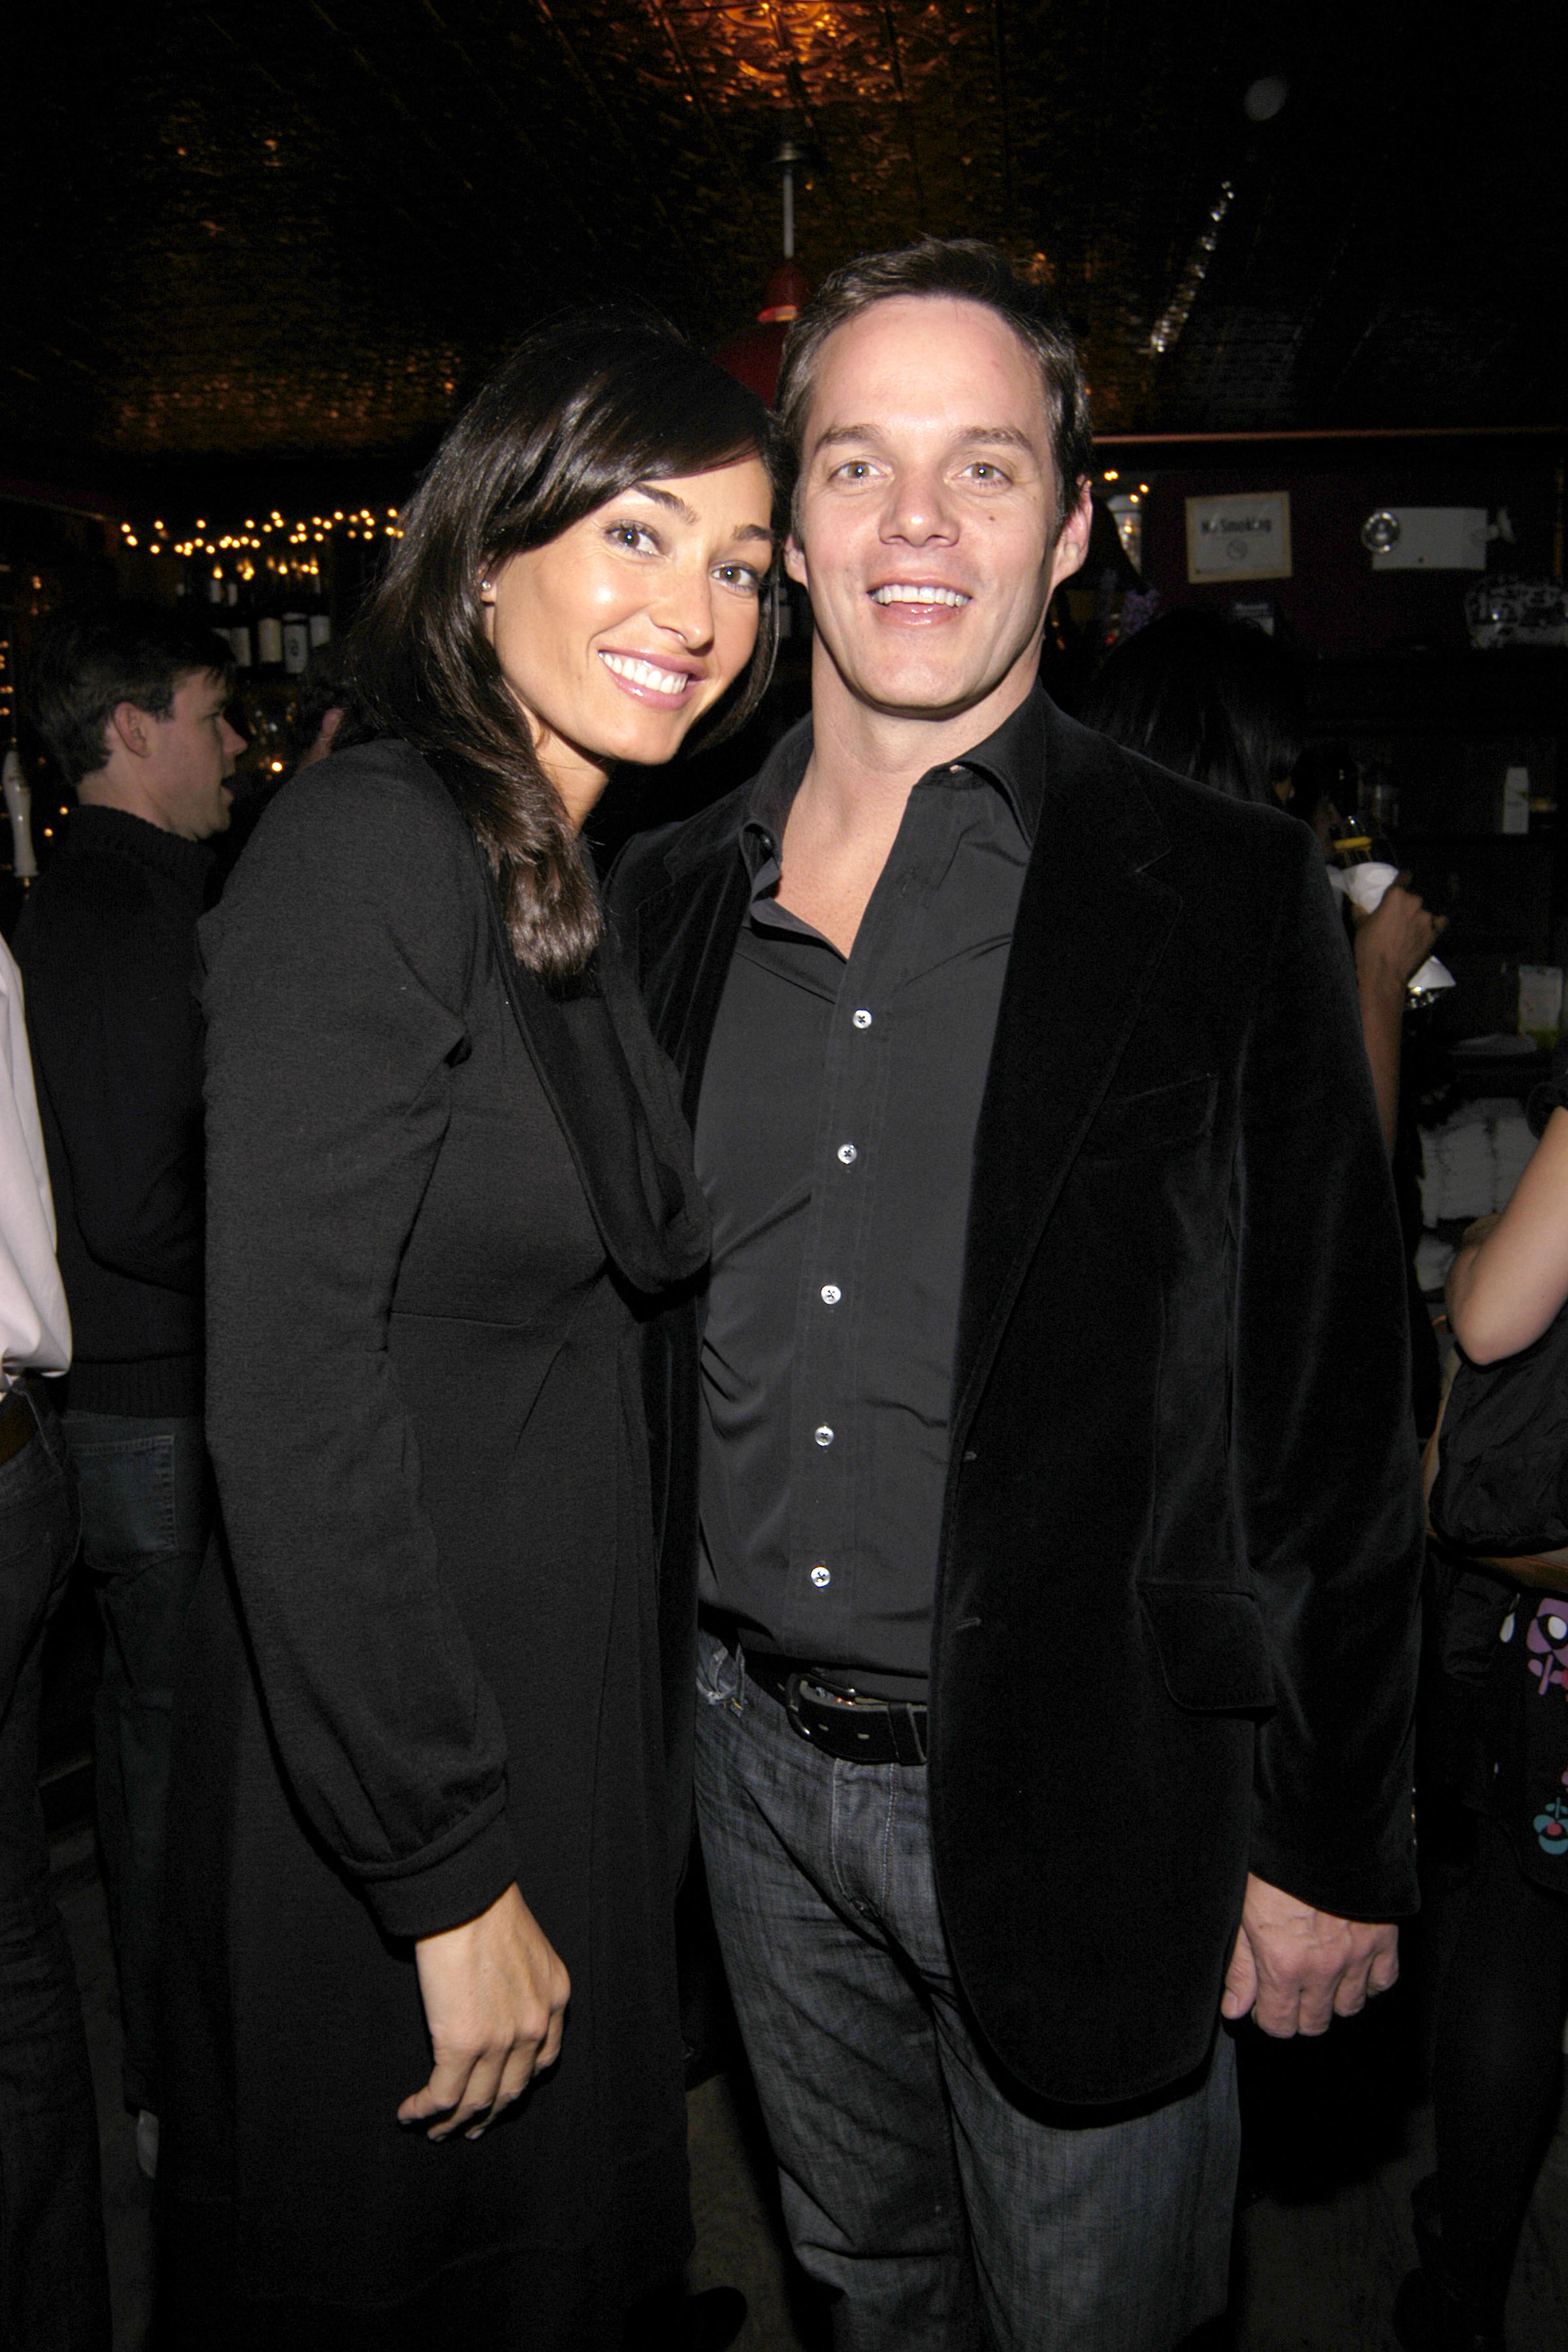 Dara Tomanovich and Bill Hemmer attend New York Magazine's 3rd Annual Oscar Viewing Party at The Spotted Pig on February 24, 2008, in New York City. | Source: Getty Images